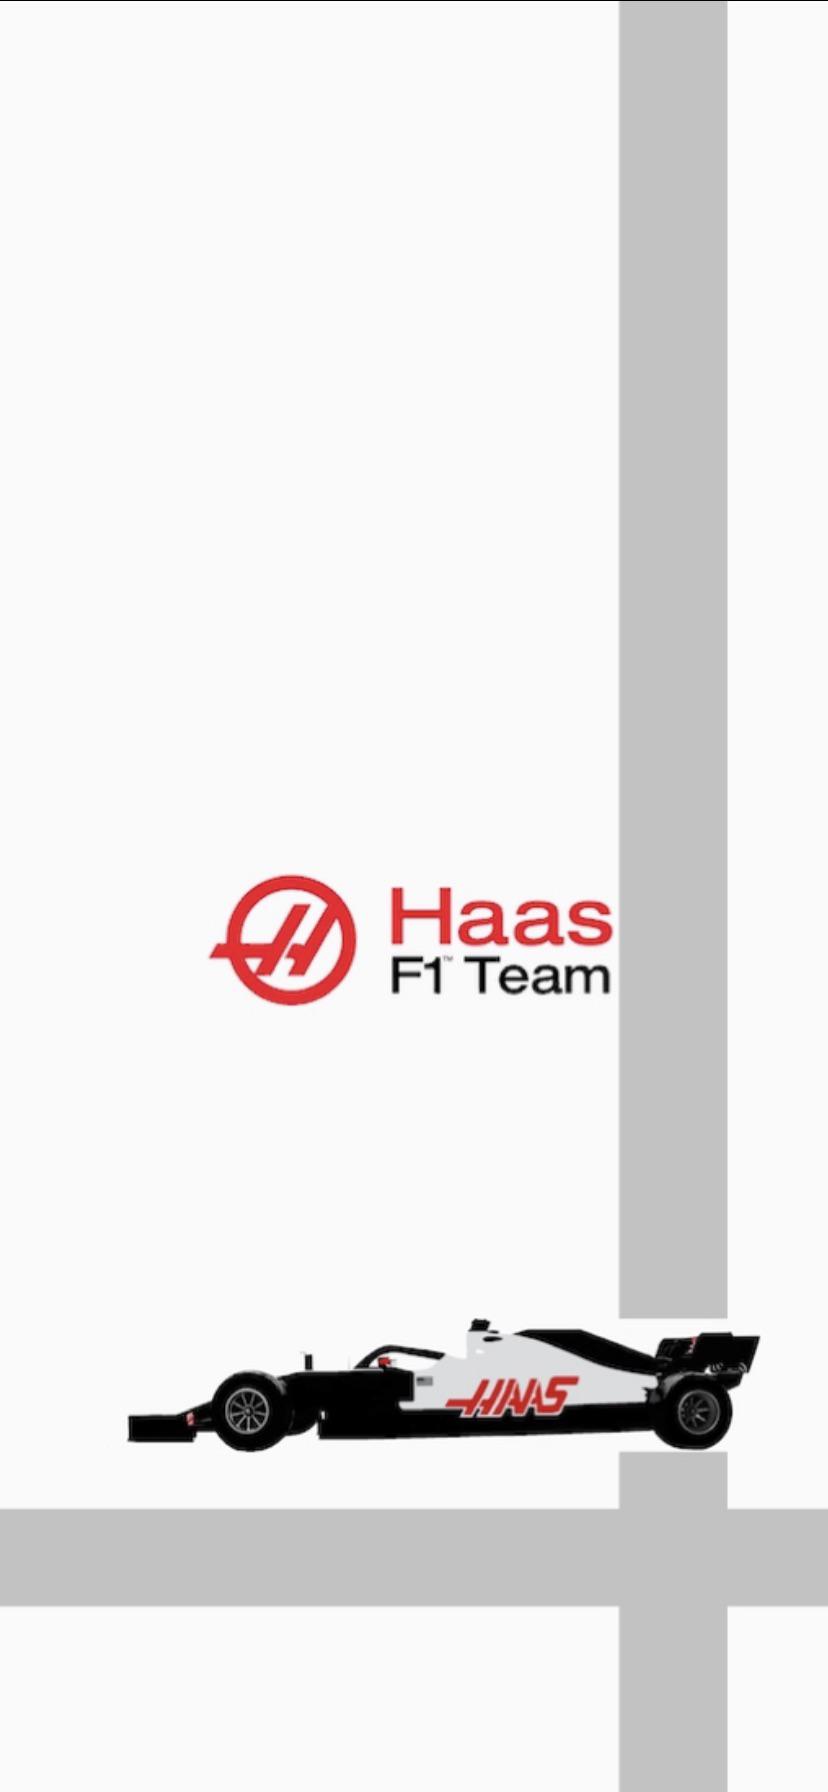 Here's a HAAS F1 Mobile Wallpaper that i made